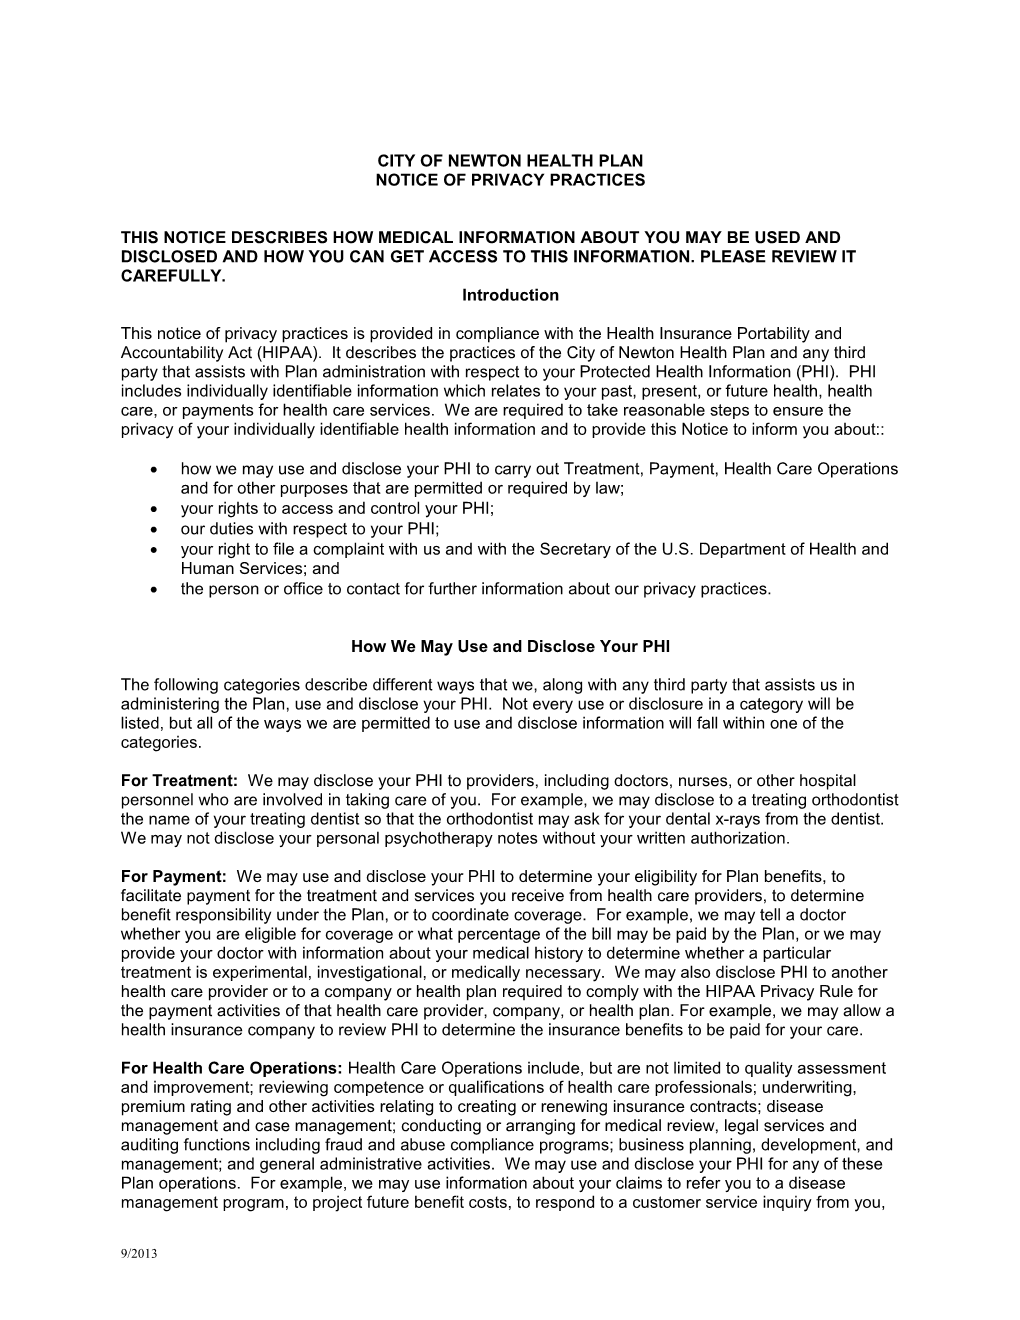 City of Newton Health Plan Notice of Privacy Practices Page 1 of 5